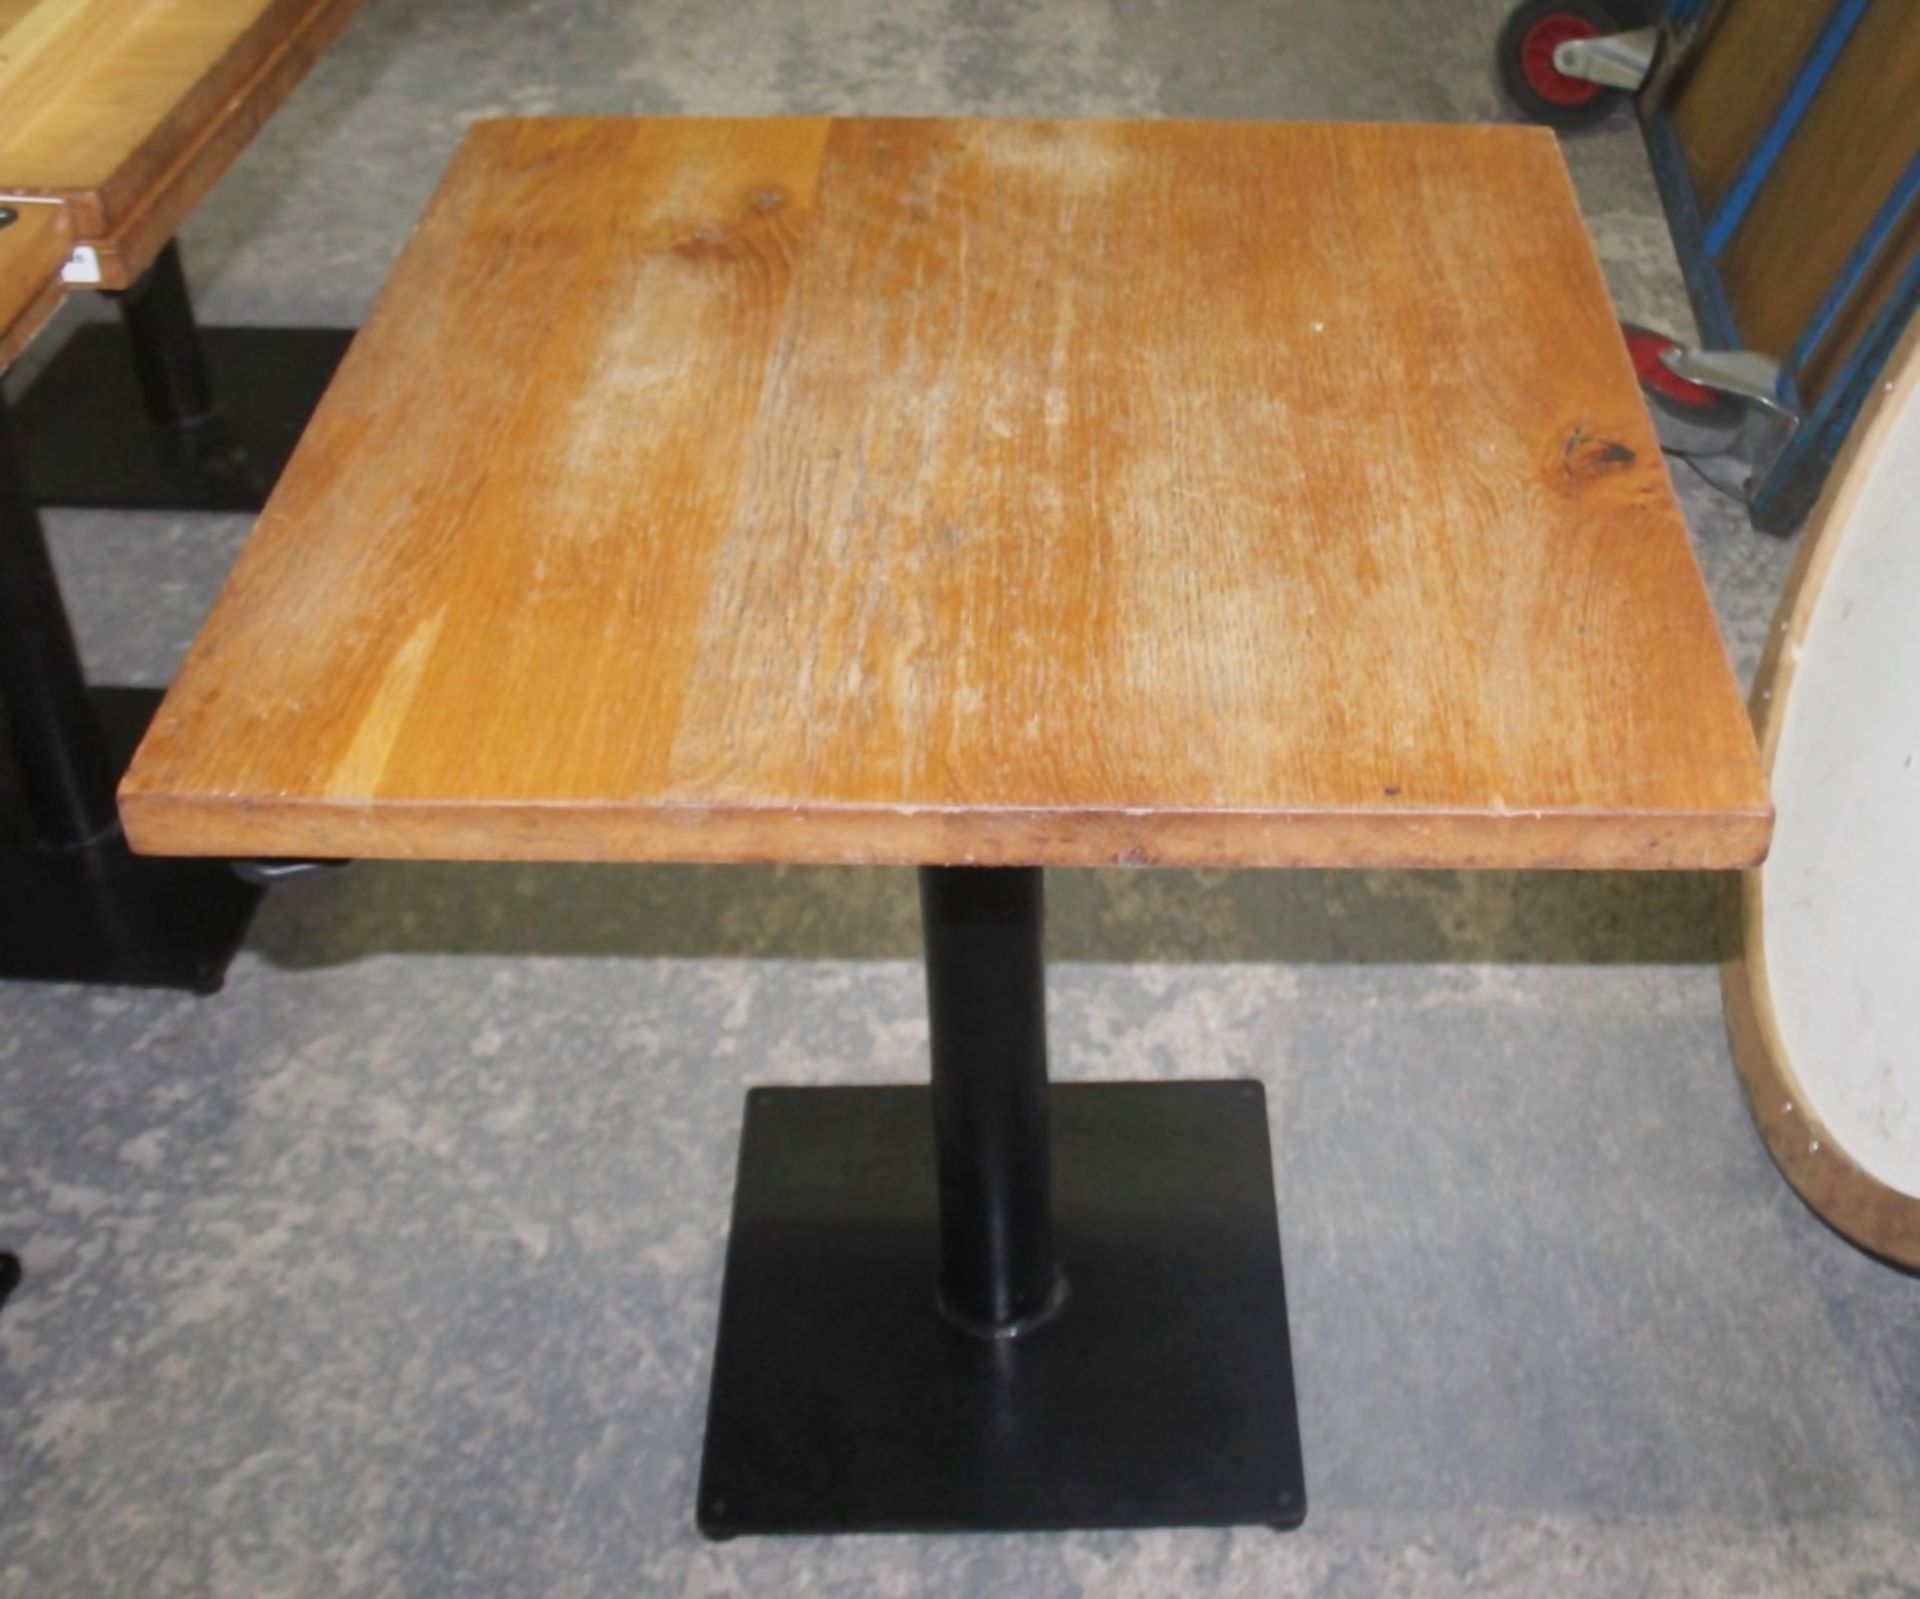 4 x Solid Oak Restaurant Dining Tables - Natural Rustic Knotty Oak Tops With Black Cast Iron Bases - - Image 5 of 8